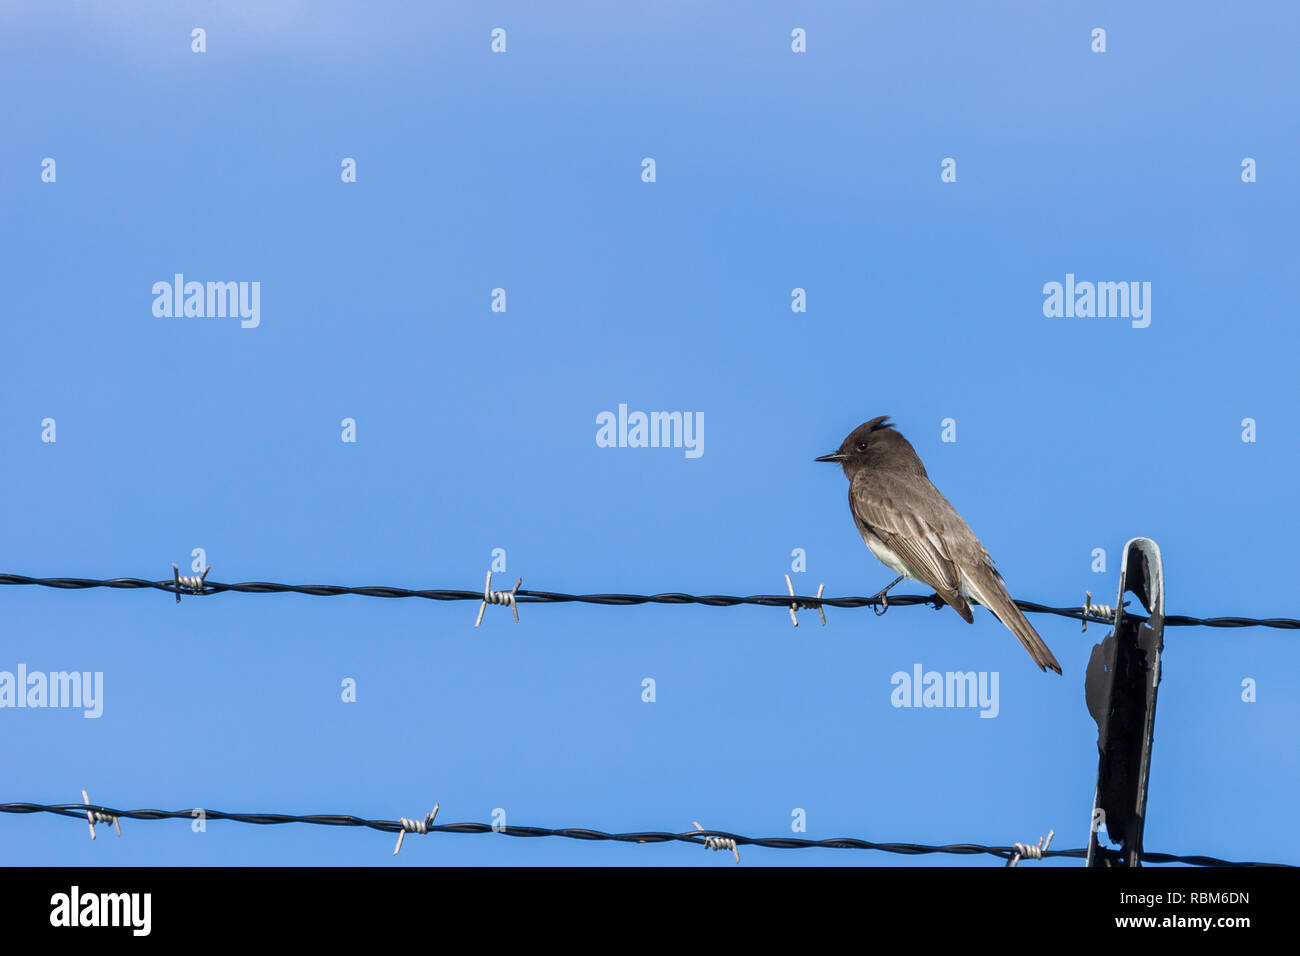 Black Phoebe sitting on a barb wire, on a sky background, California Stock Photo